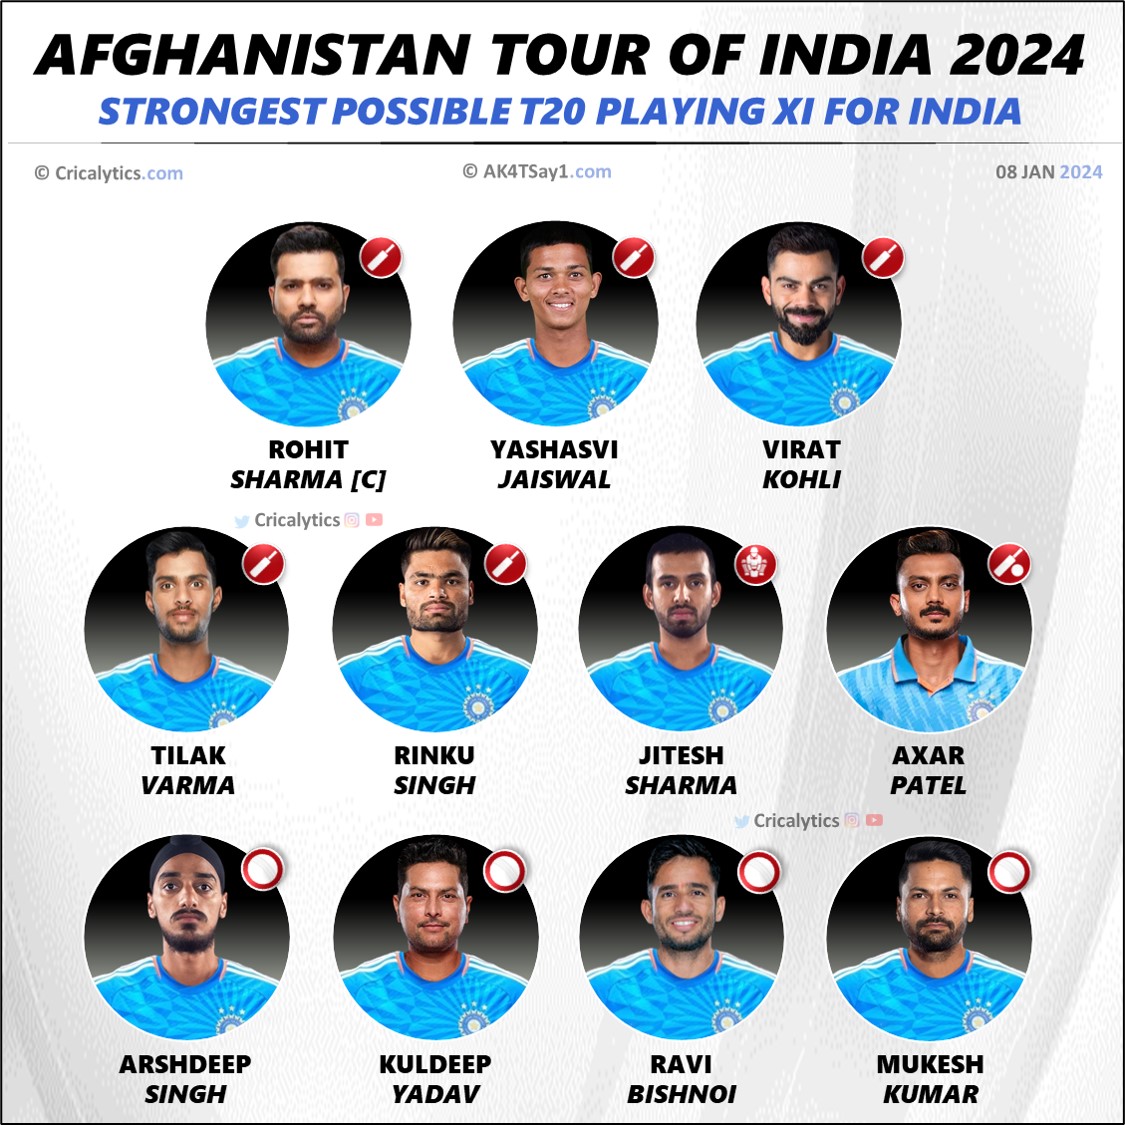 India vs Afghanistan 2024 Strongest T20 Playing 11 for Indian Team